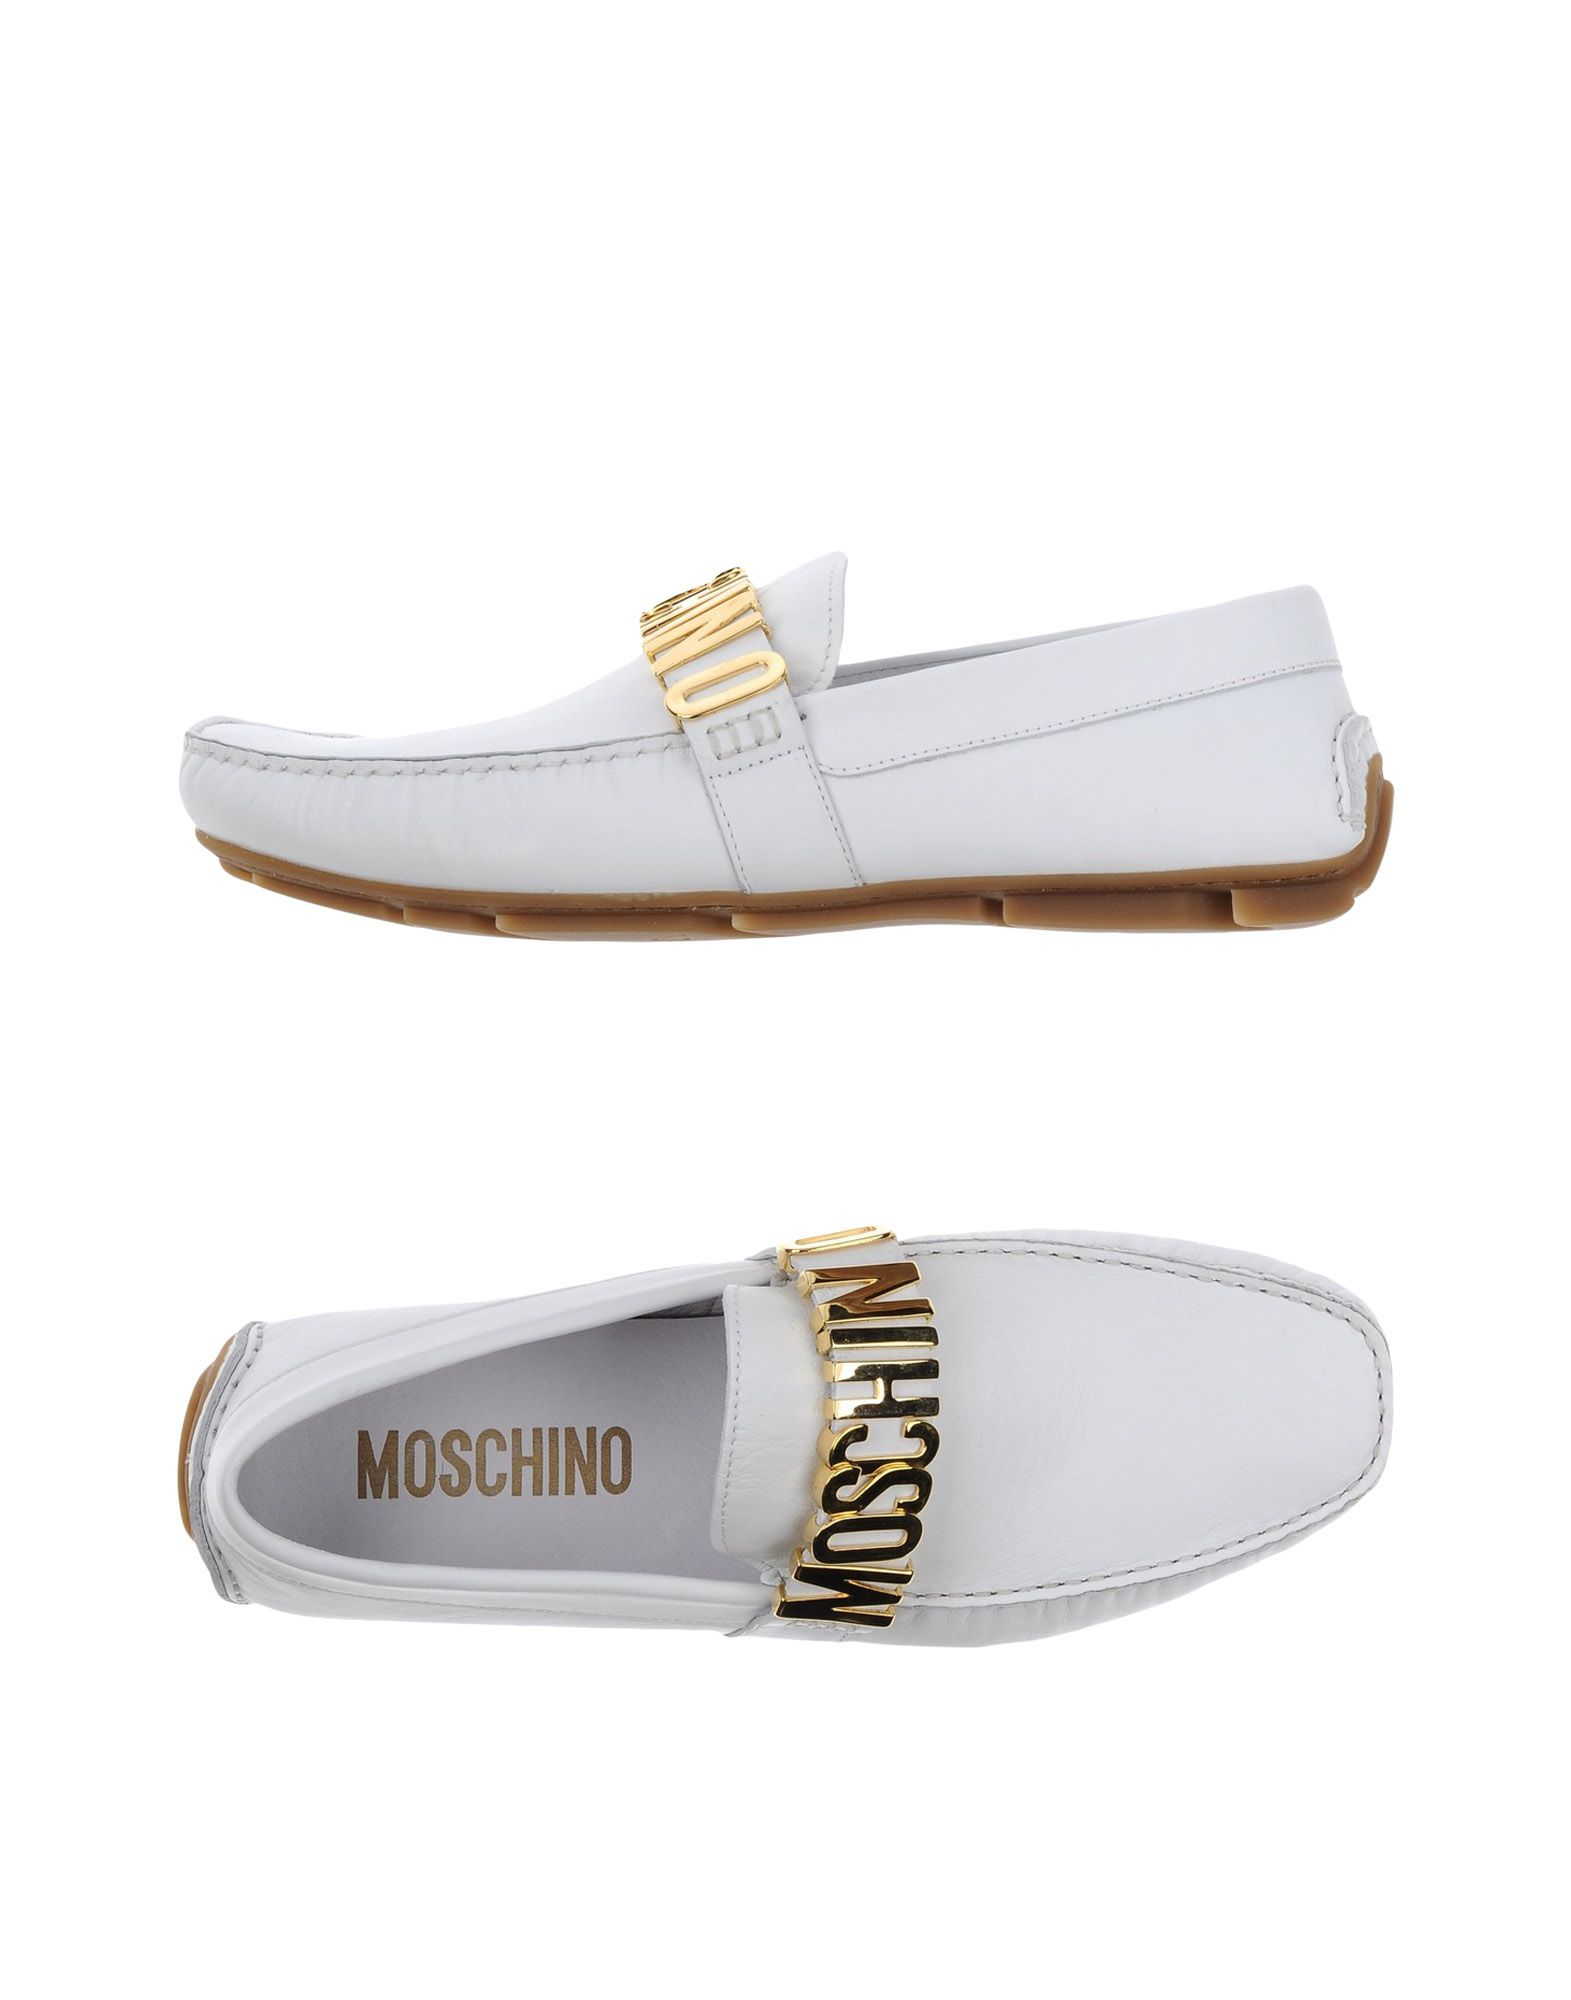 Lyst - Moschino Moccasins in White for Men